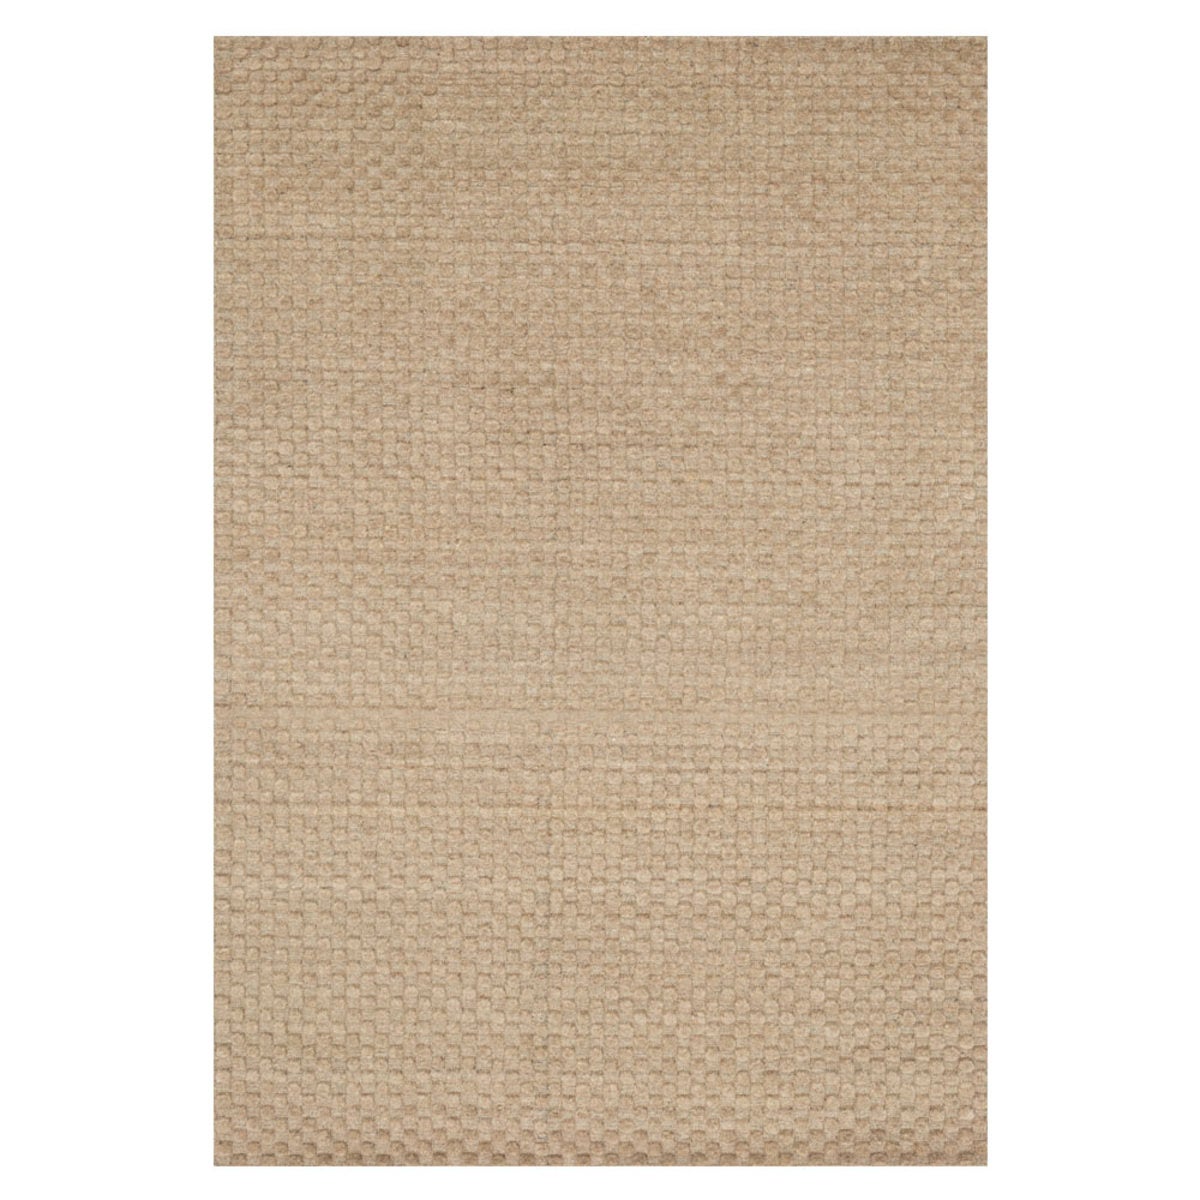 Loloi Hadley Dotted Rug in Dune - 7'6" x 9'6" - Dune